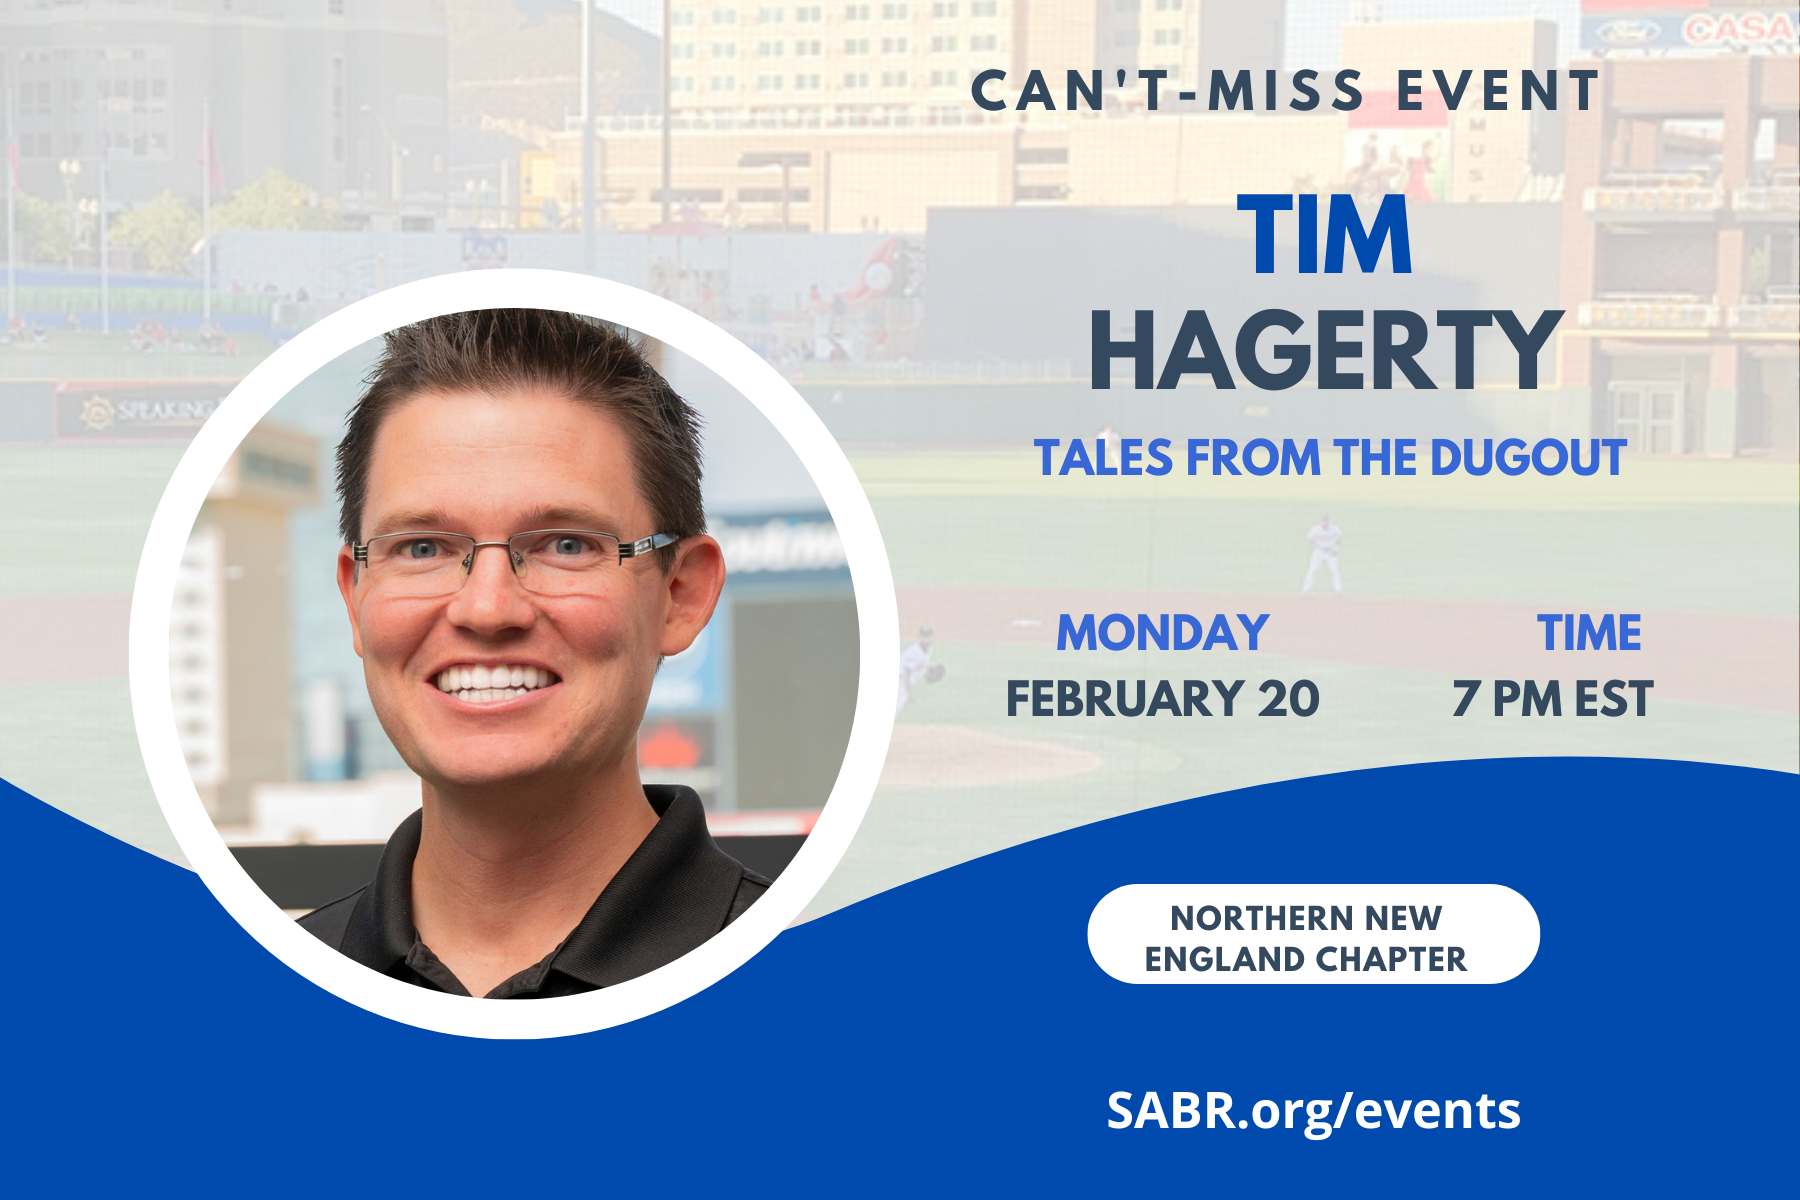 SABR's Northern New England Chapter, in partnership with the Gardner-Waterman Vermont Chapter, will host a virtual Zoom meeting from 7:00-8:00 p.m. EST on Tuesday, February 20, 2023. All baseball fans are welcome to attend. Our guest speaker will be Tim Hagerty, author of "Tales from the Dugout: 1,001 Humorous, Inspirational & Wild Anecdotes from Minor League Baseball."